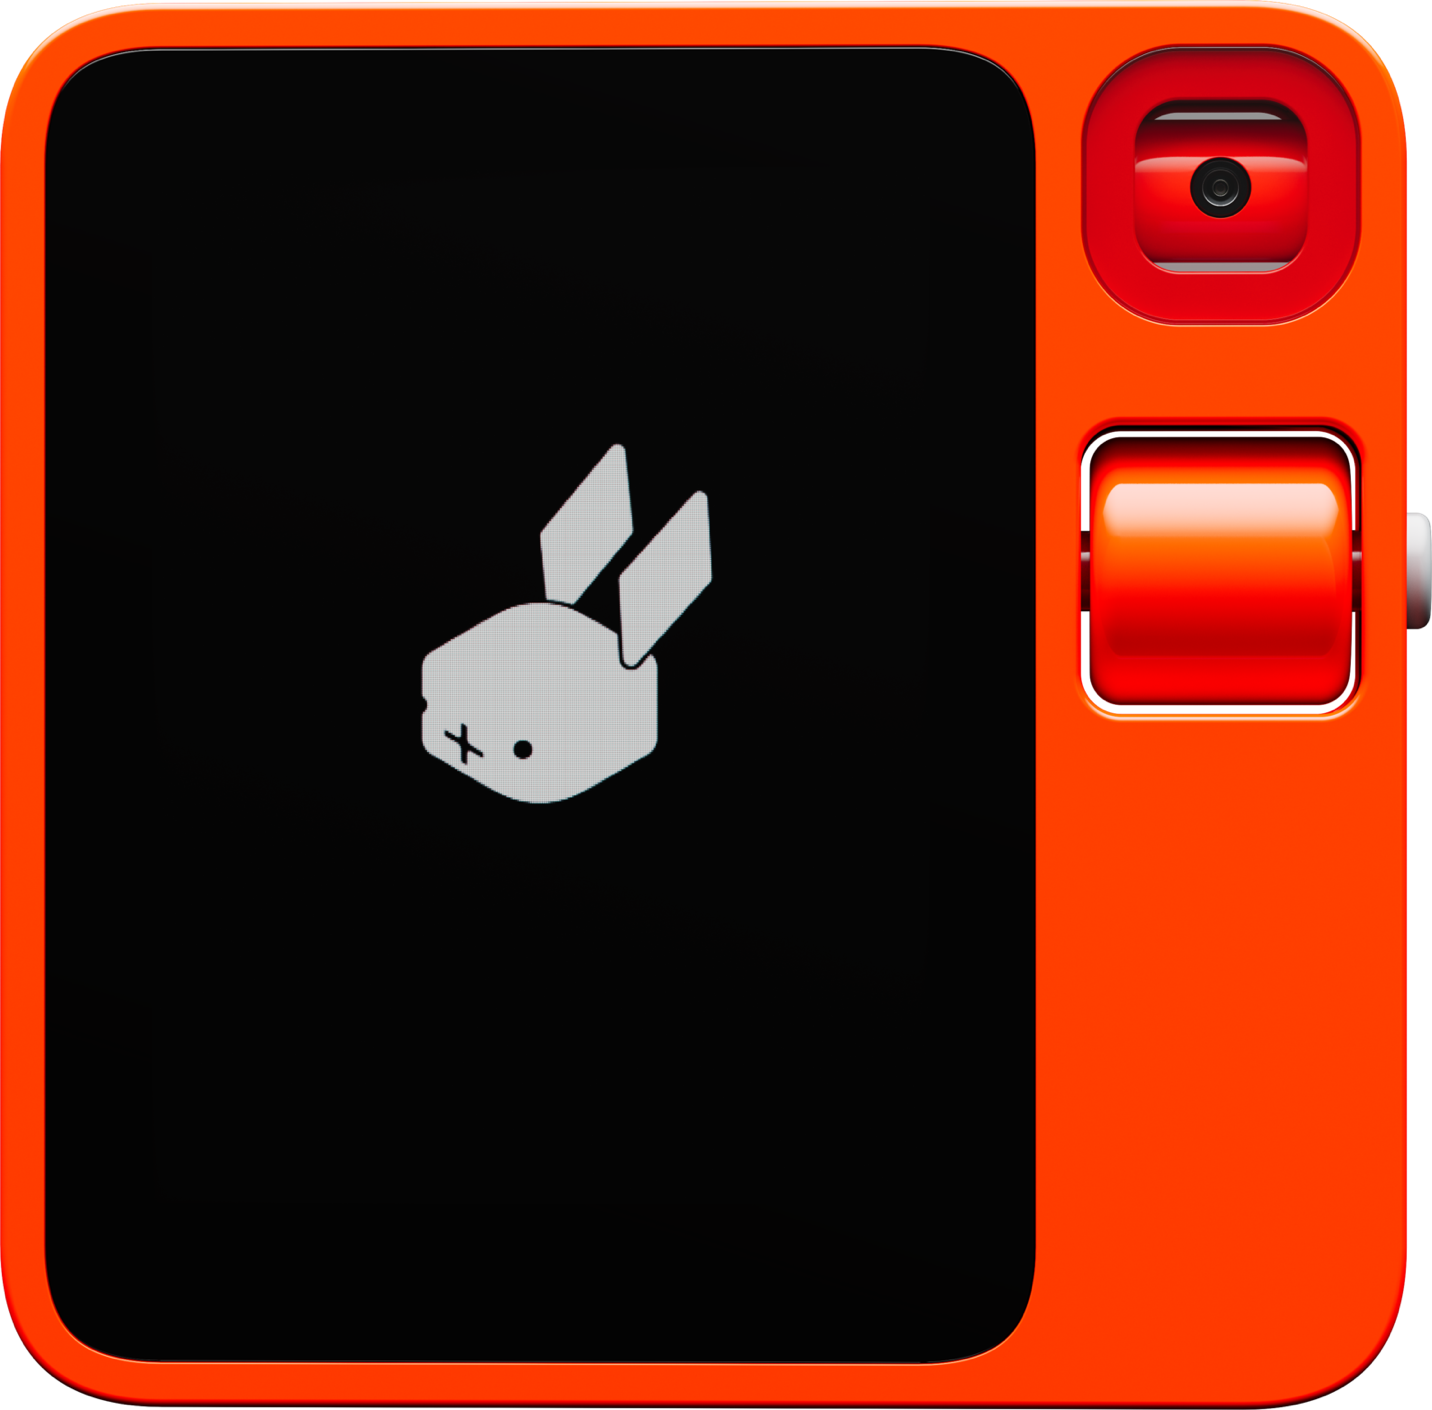 A red and black square with a white rabbit on it

Description automatically generated